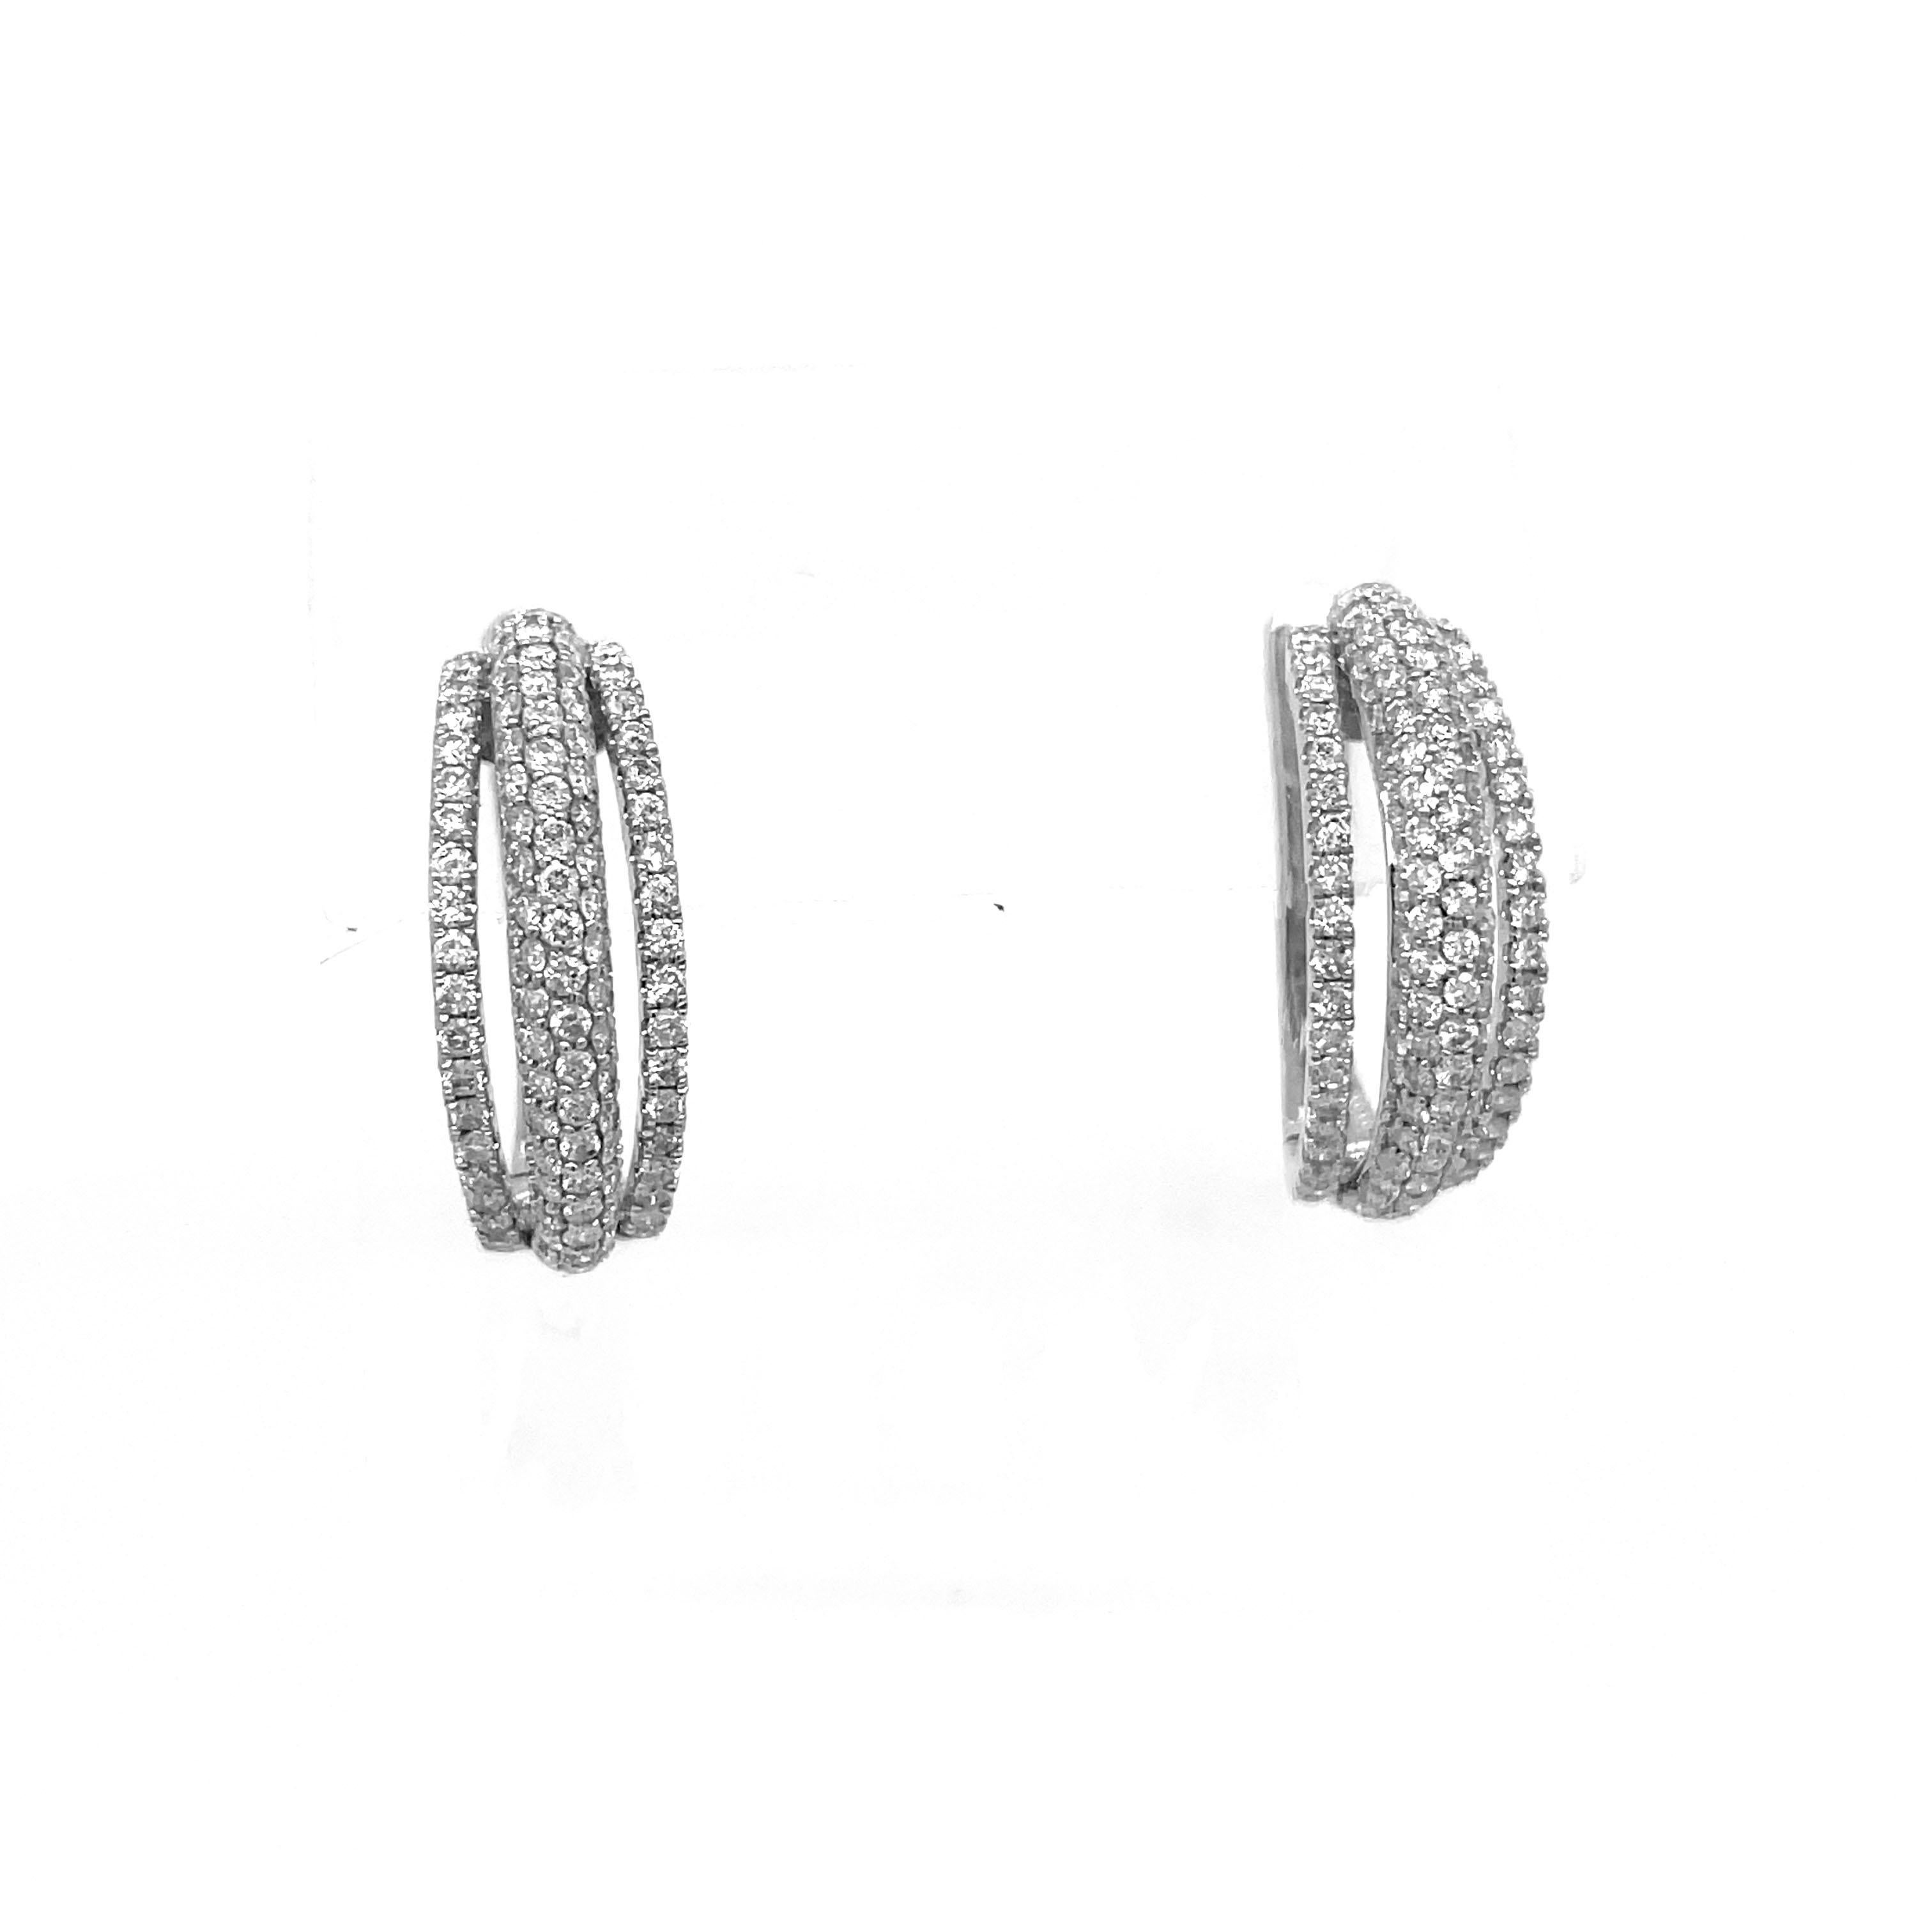 This is an exquisite pair of diamond hoop earrings with a three-row pave design encased in 18K white gold. Diamonds are a girl's best friend and this pair of diamond-studded earrings would make a beautiful addition to your jewelry collection. This